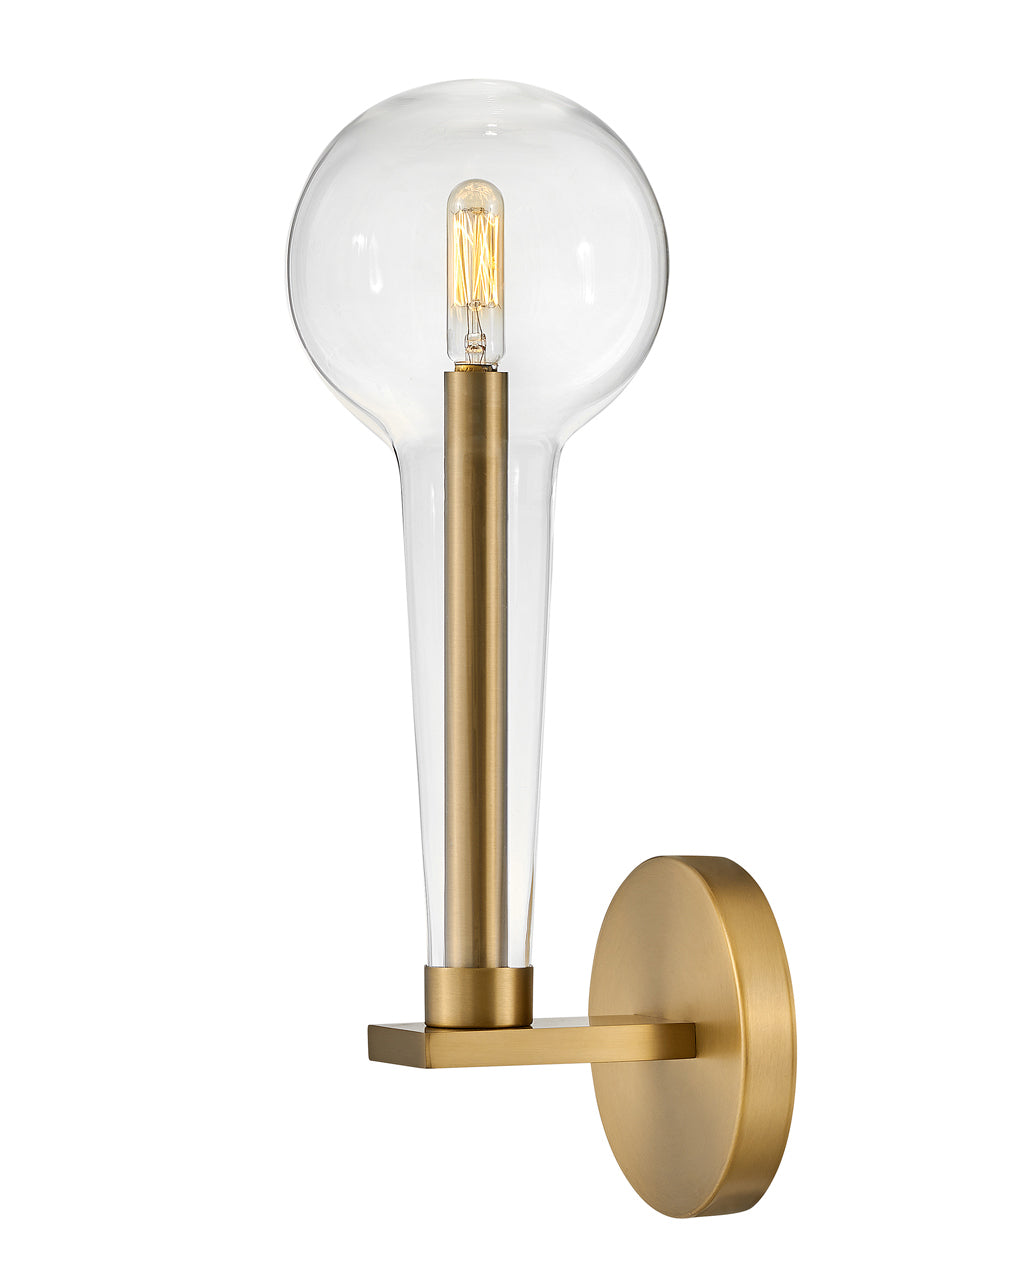 Hinkley Alchemy Sconce Sconce Hinkley Lacquered Brass 6.25x5.25x15.75 